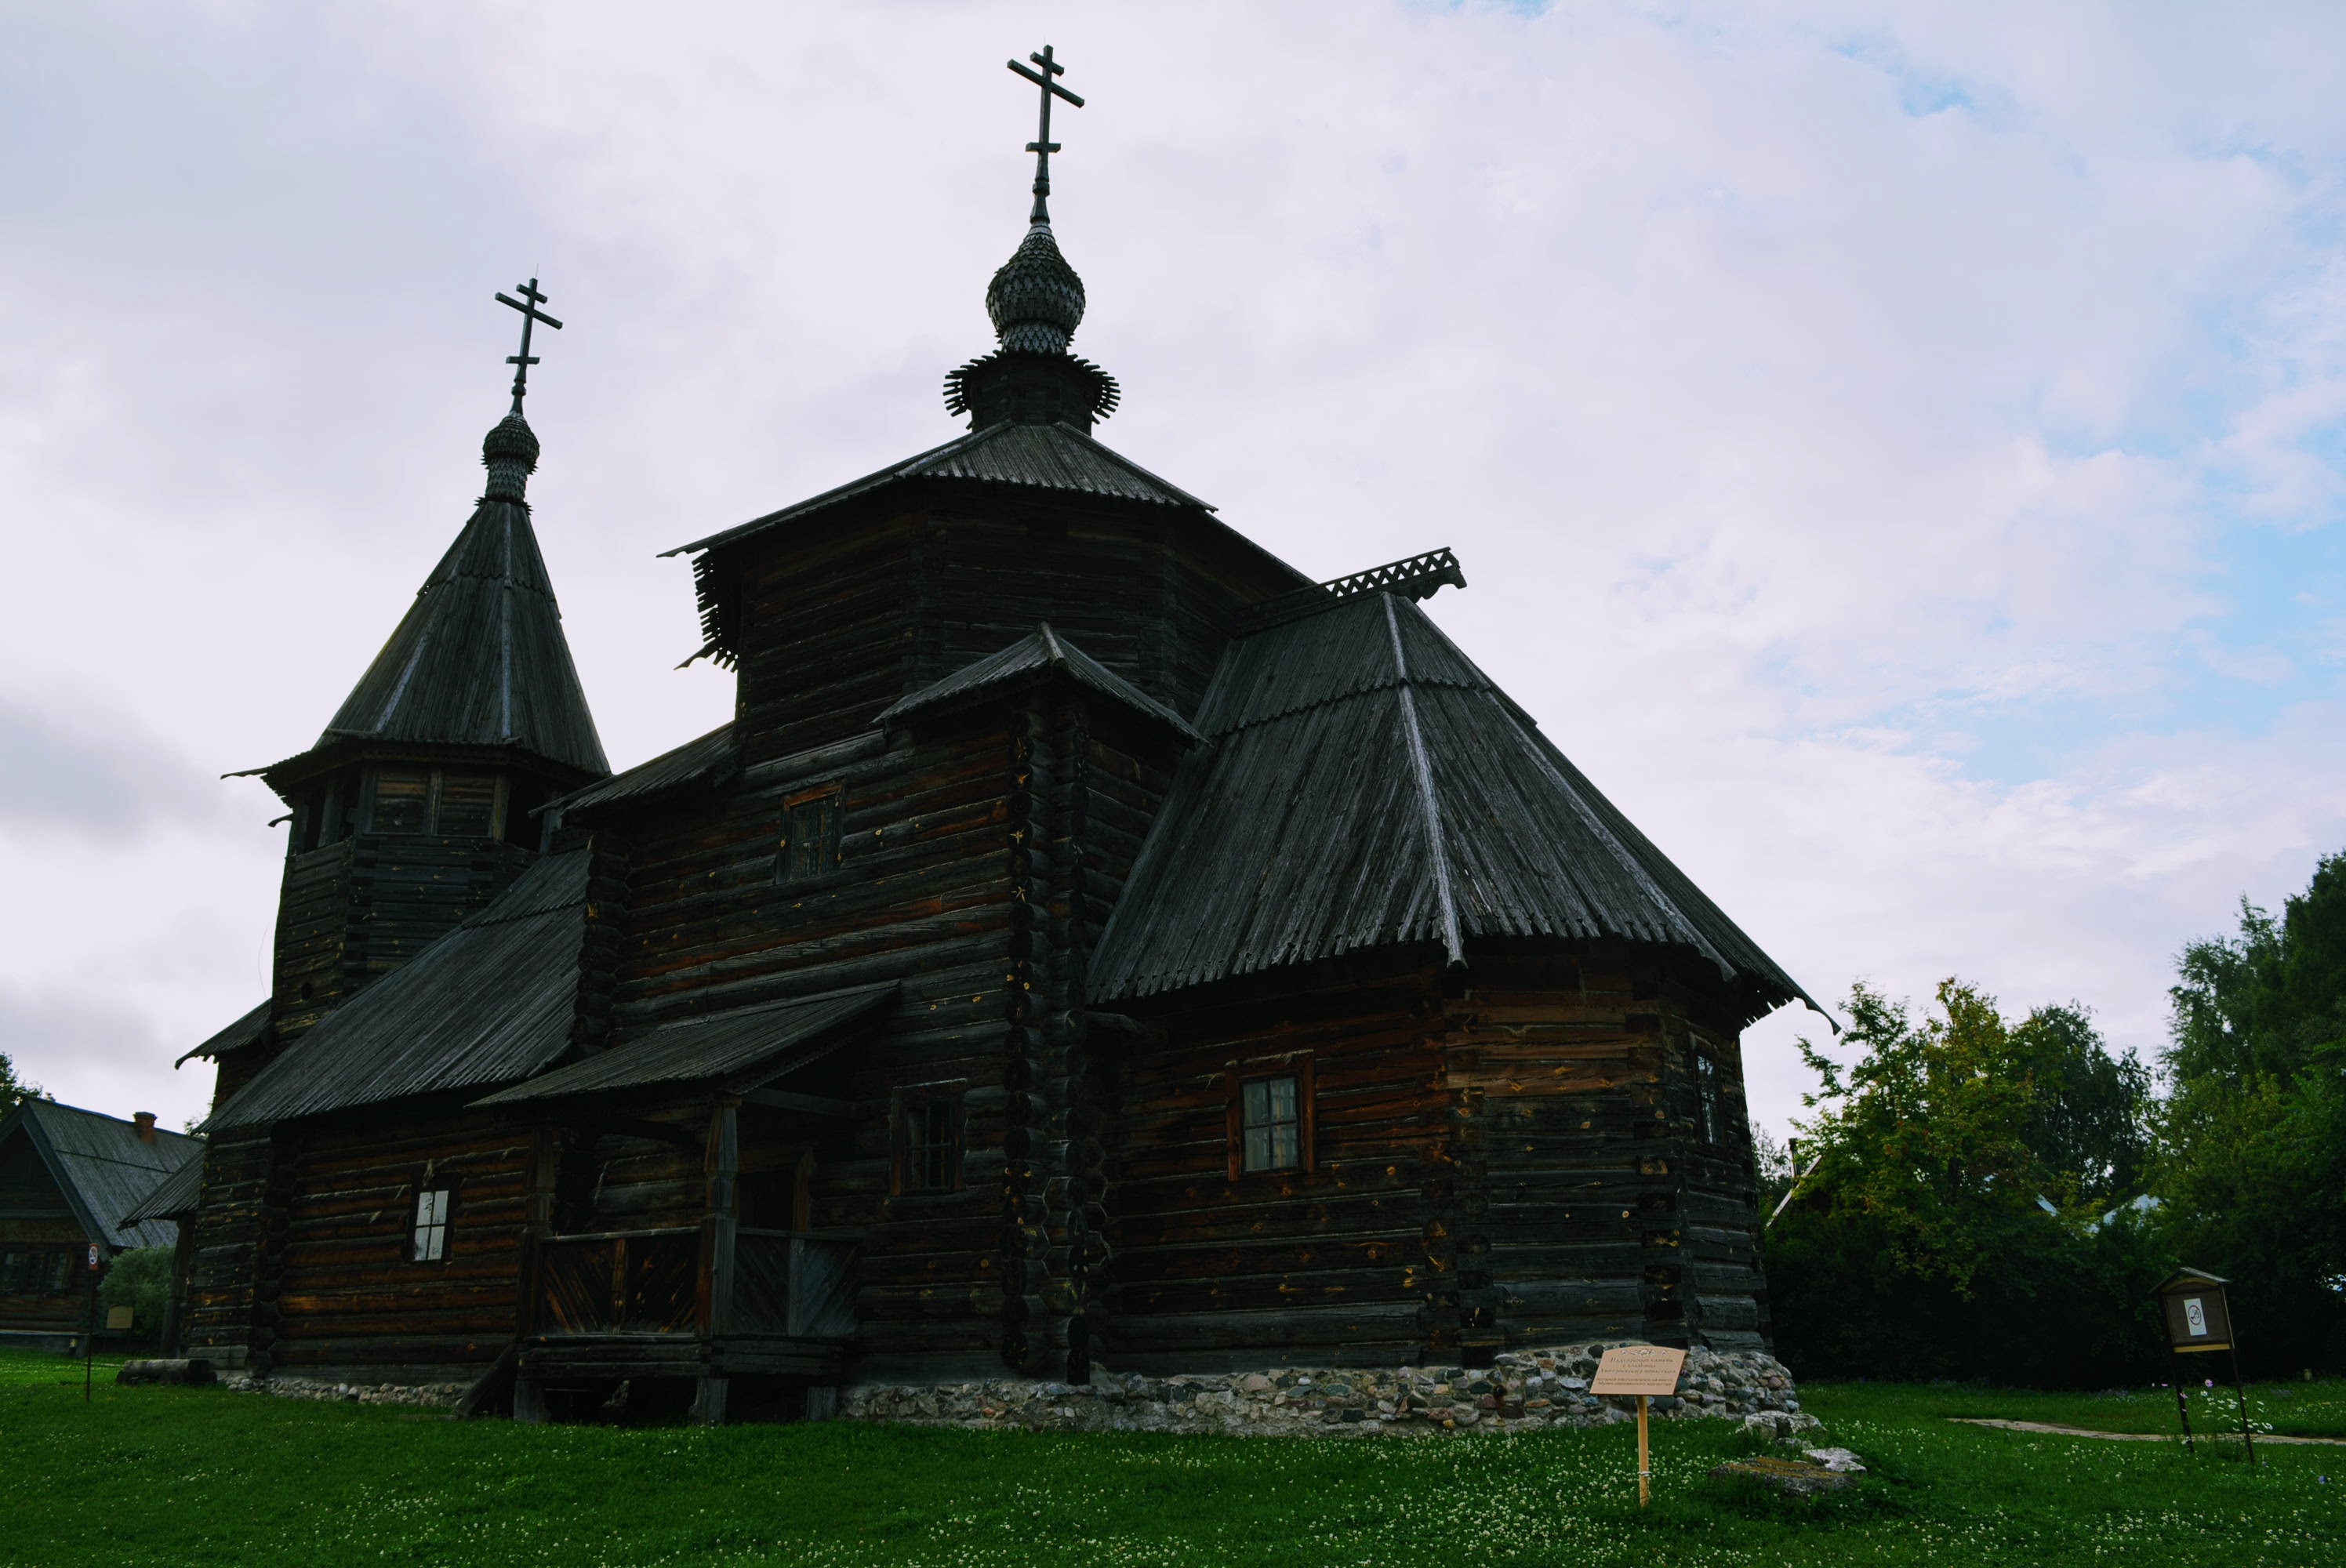 Museum of Wooden Architecture in Suzdal